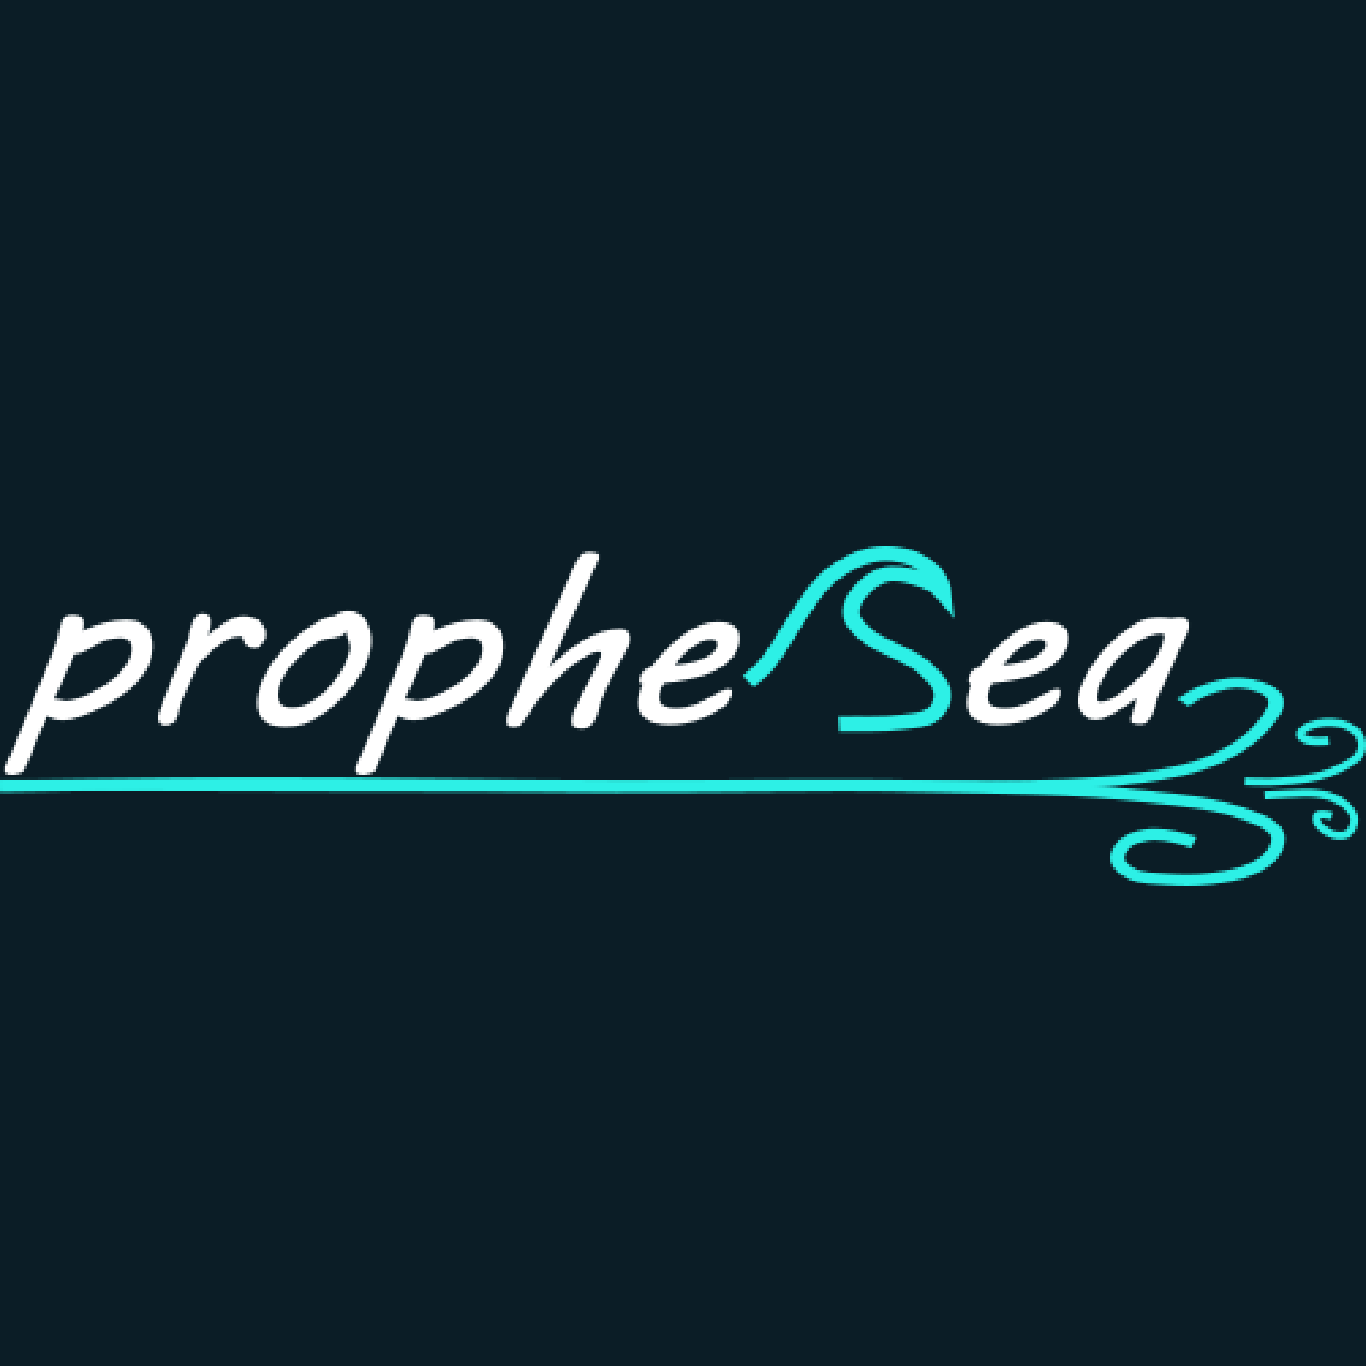 PropheSea, driven by a mission to combat the climate crisis, pioneers foresight and predictive modeling to address environmental challenges.